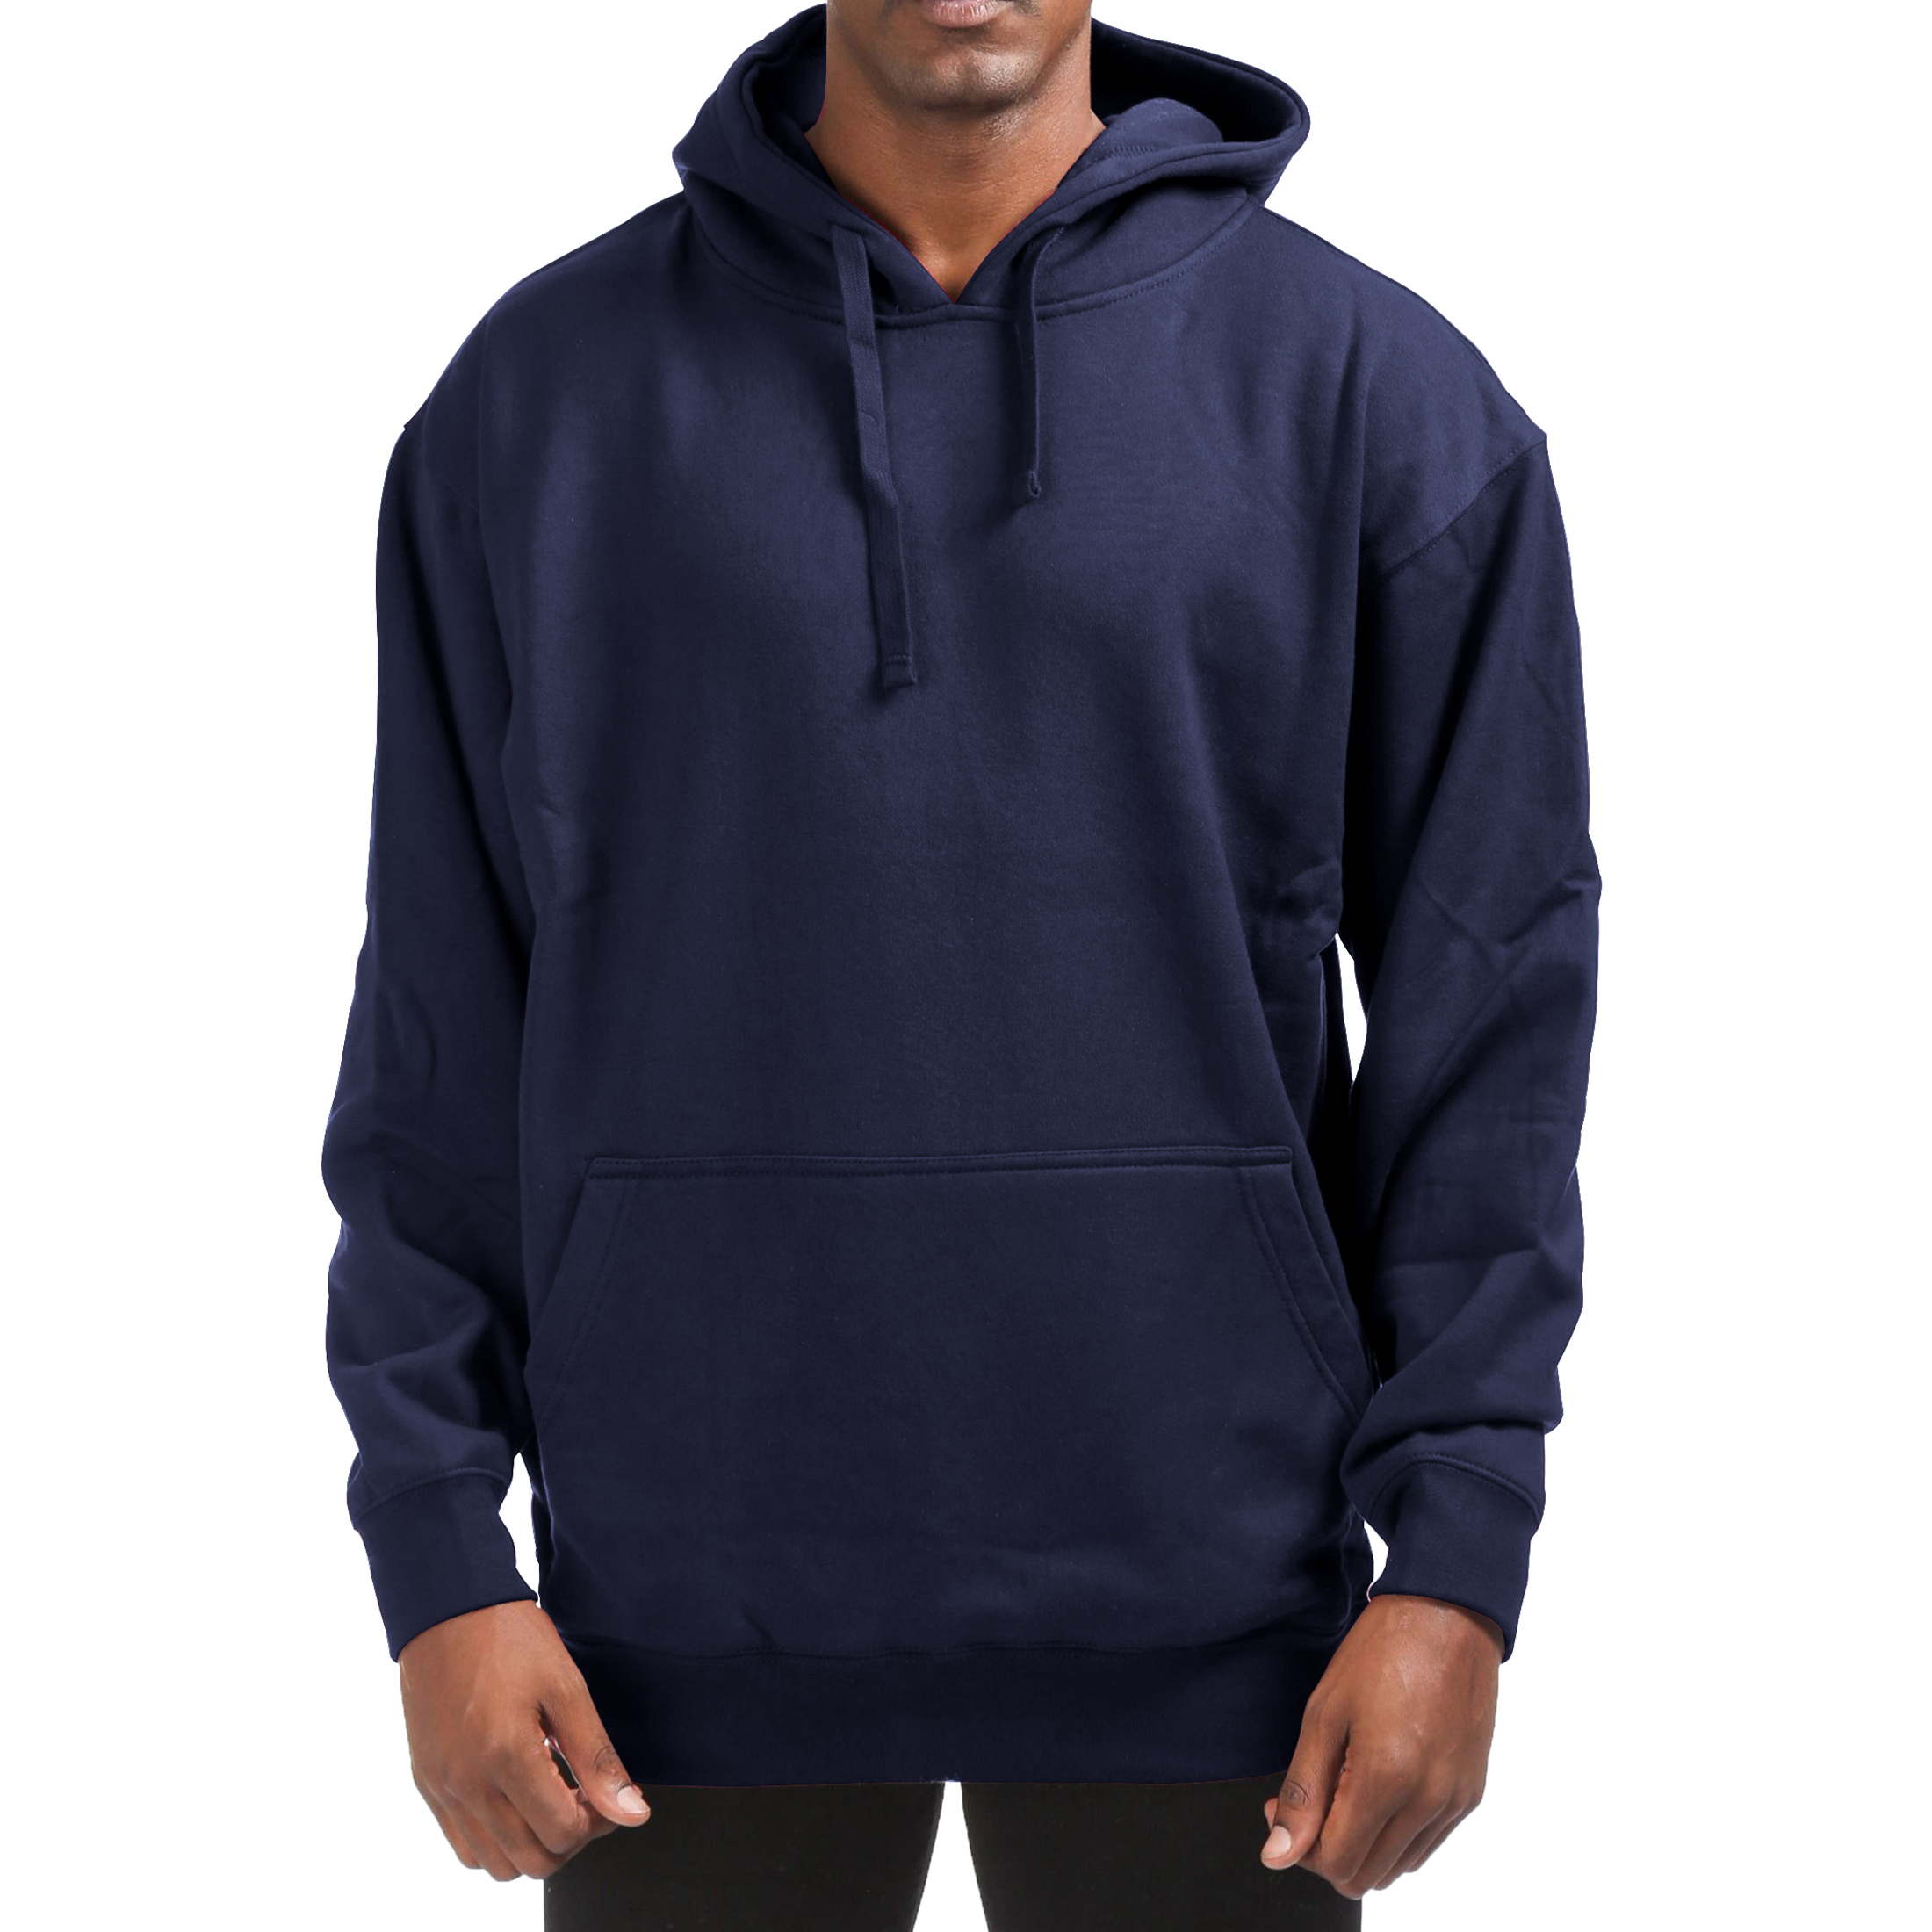 Men's Cotton-Blend Fleece Pullover Hoodie With Pocket (Big & Tall Sizes Available) - Navy, 3X-Large